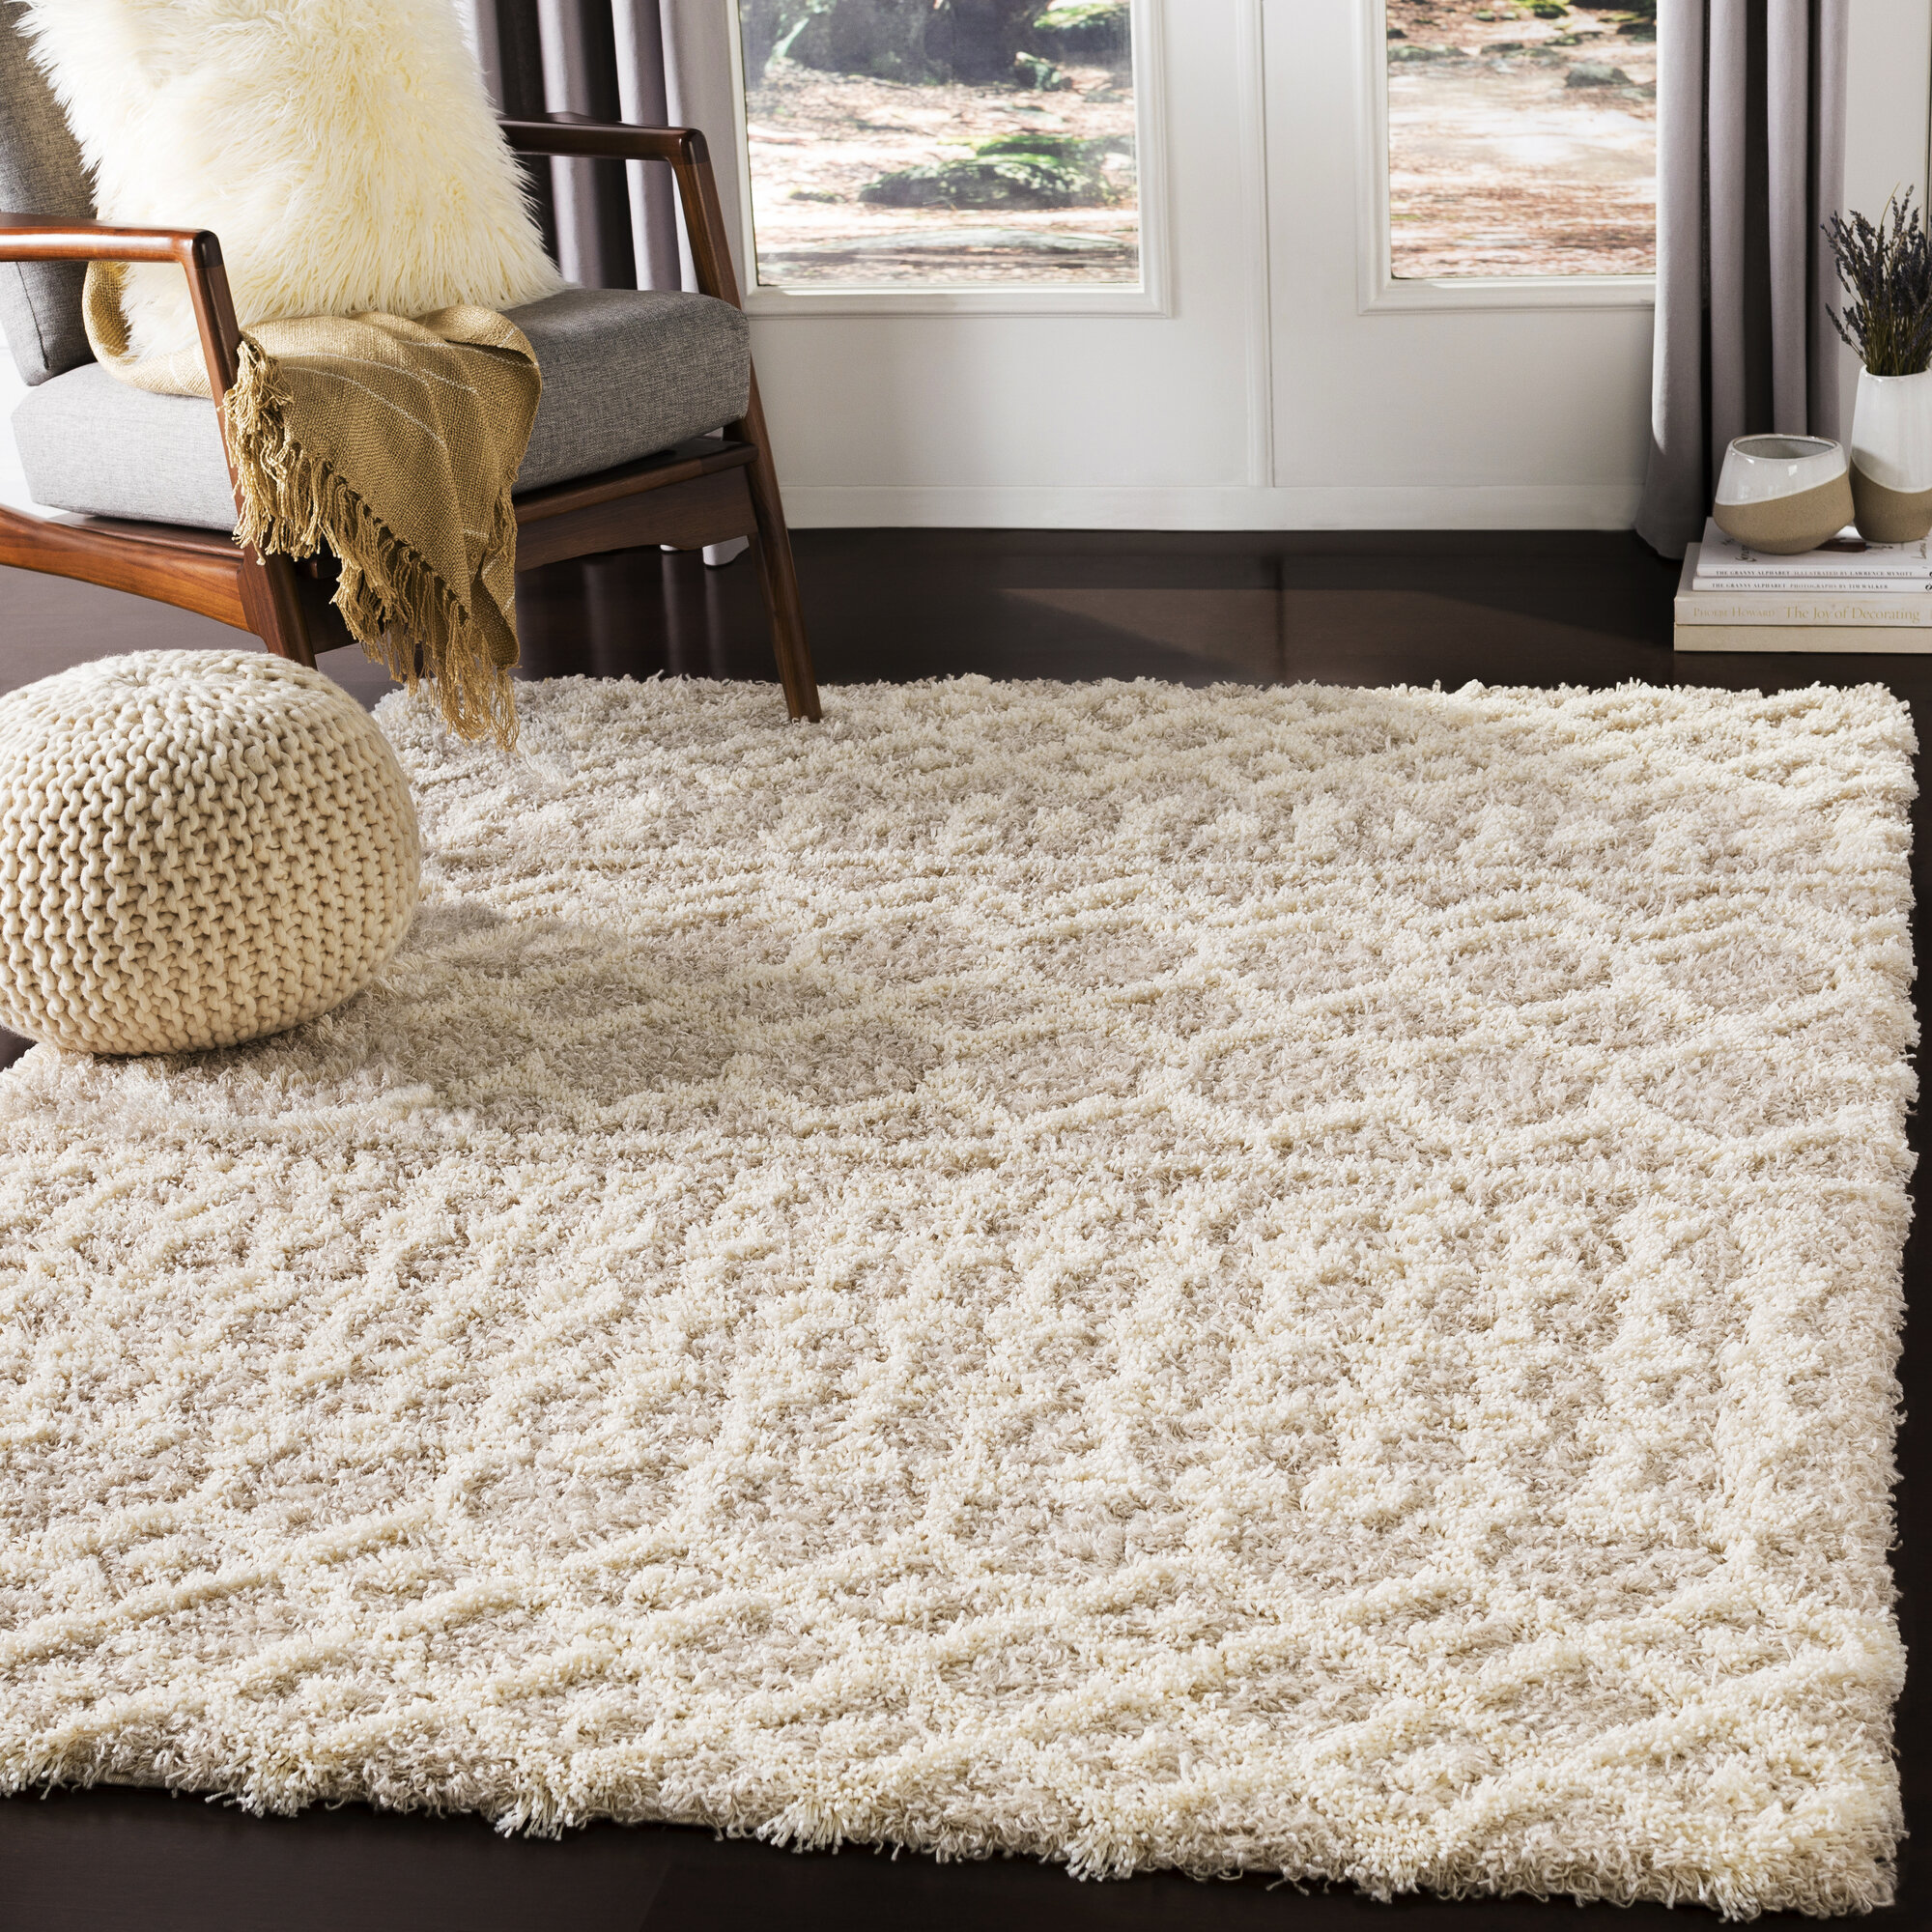 Area Rugs   Up to 20 Off Through 20/20   Wayfair